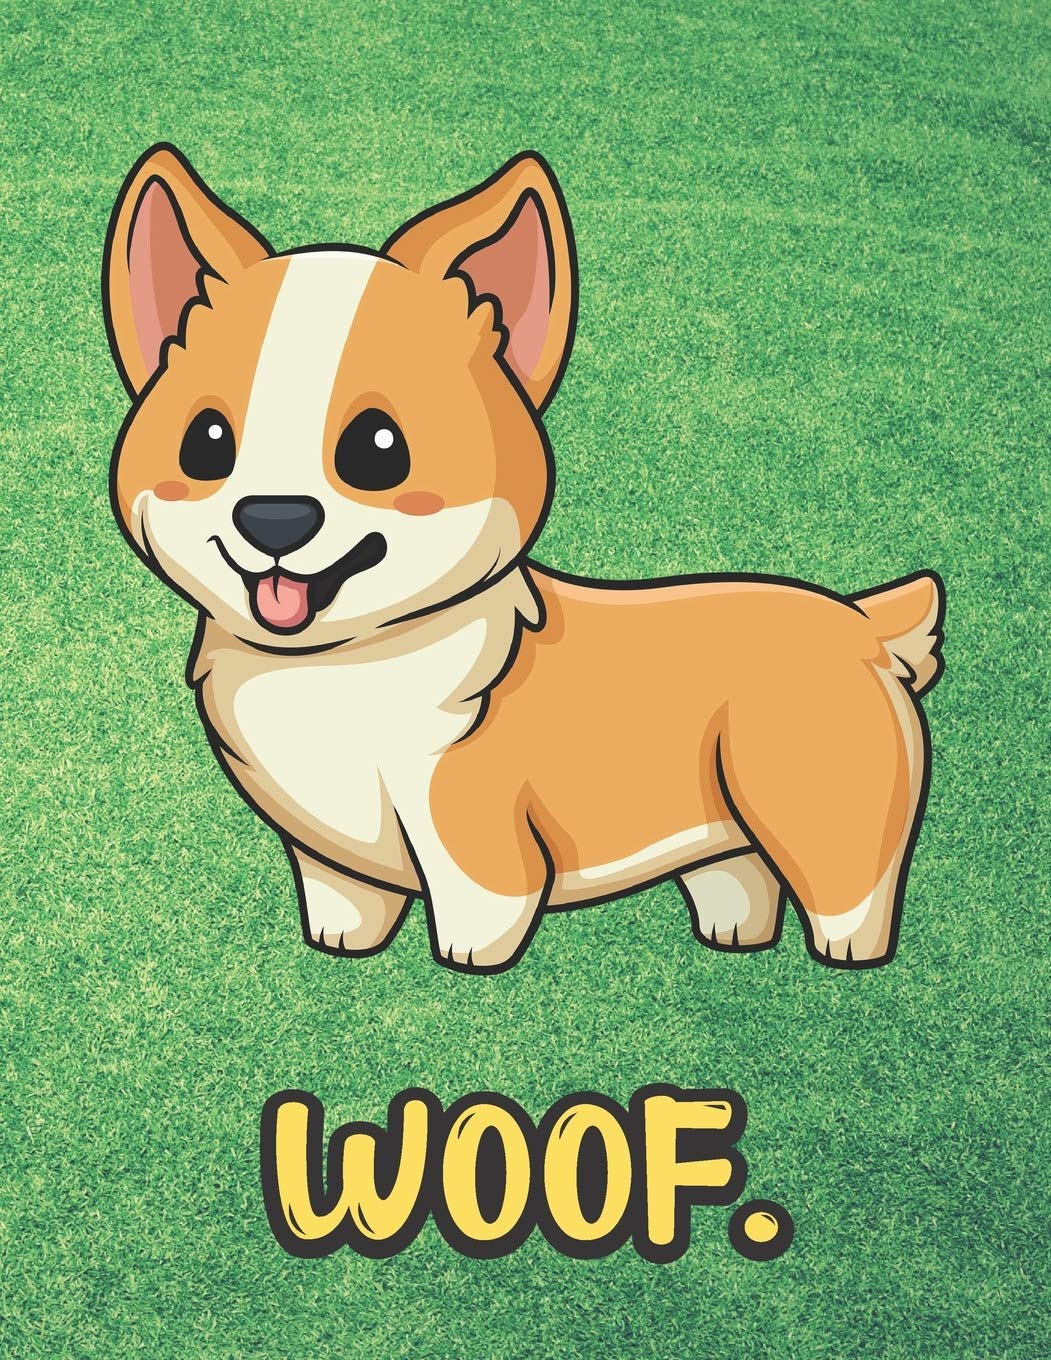 Woof: Kawaii Corgi Dog Notebook with Green Grass Background Design and Barking Noise Cover. Perfect Journal for Pet and Dog Lovers of All Ages.: Publishing, Joanna H Peterson: 9781701895492: Books